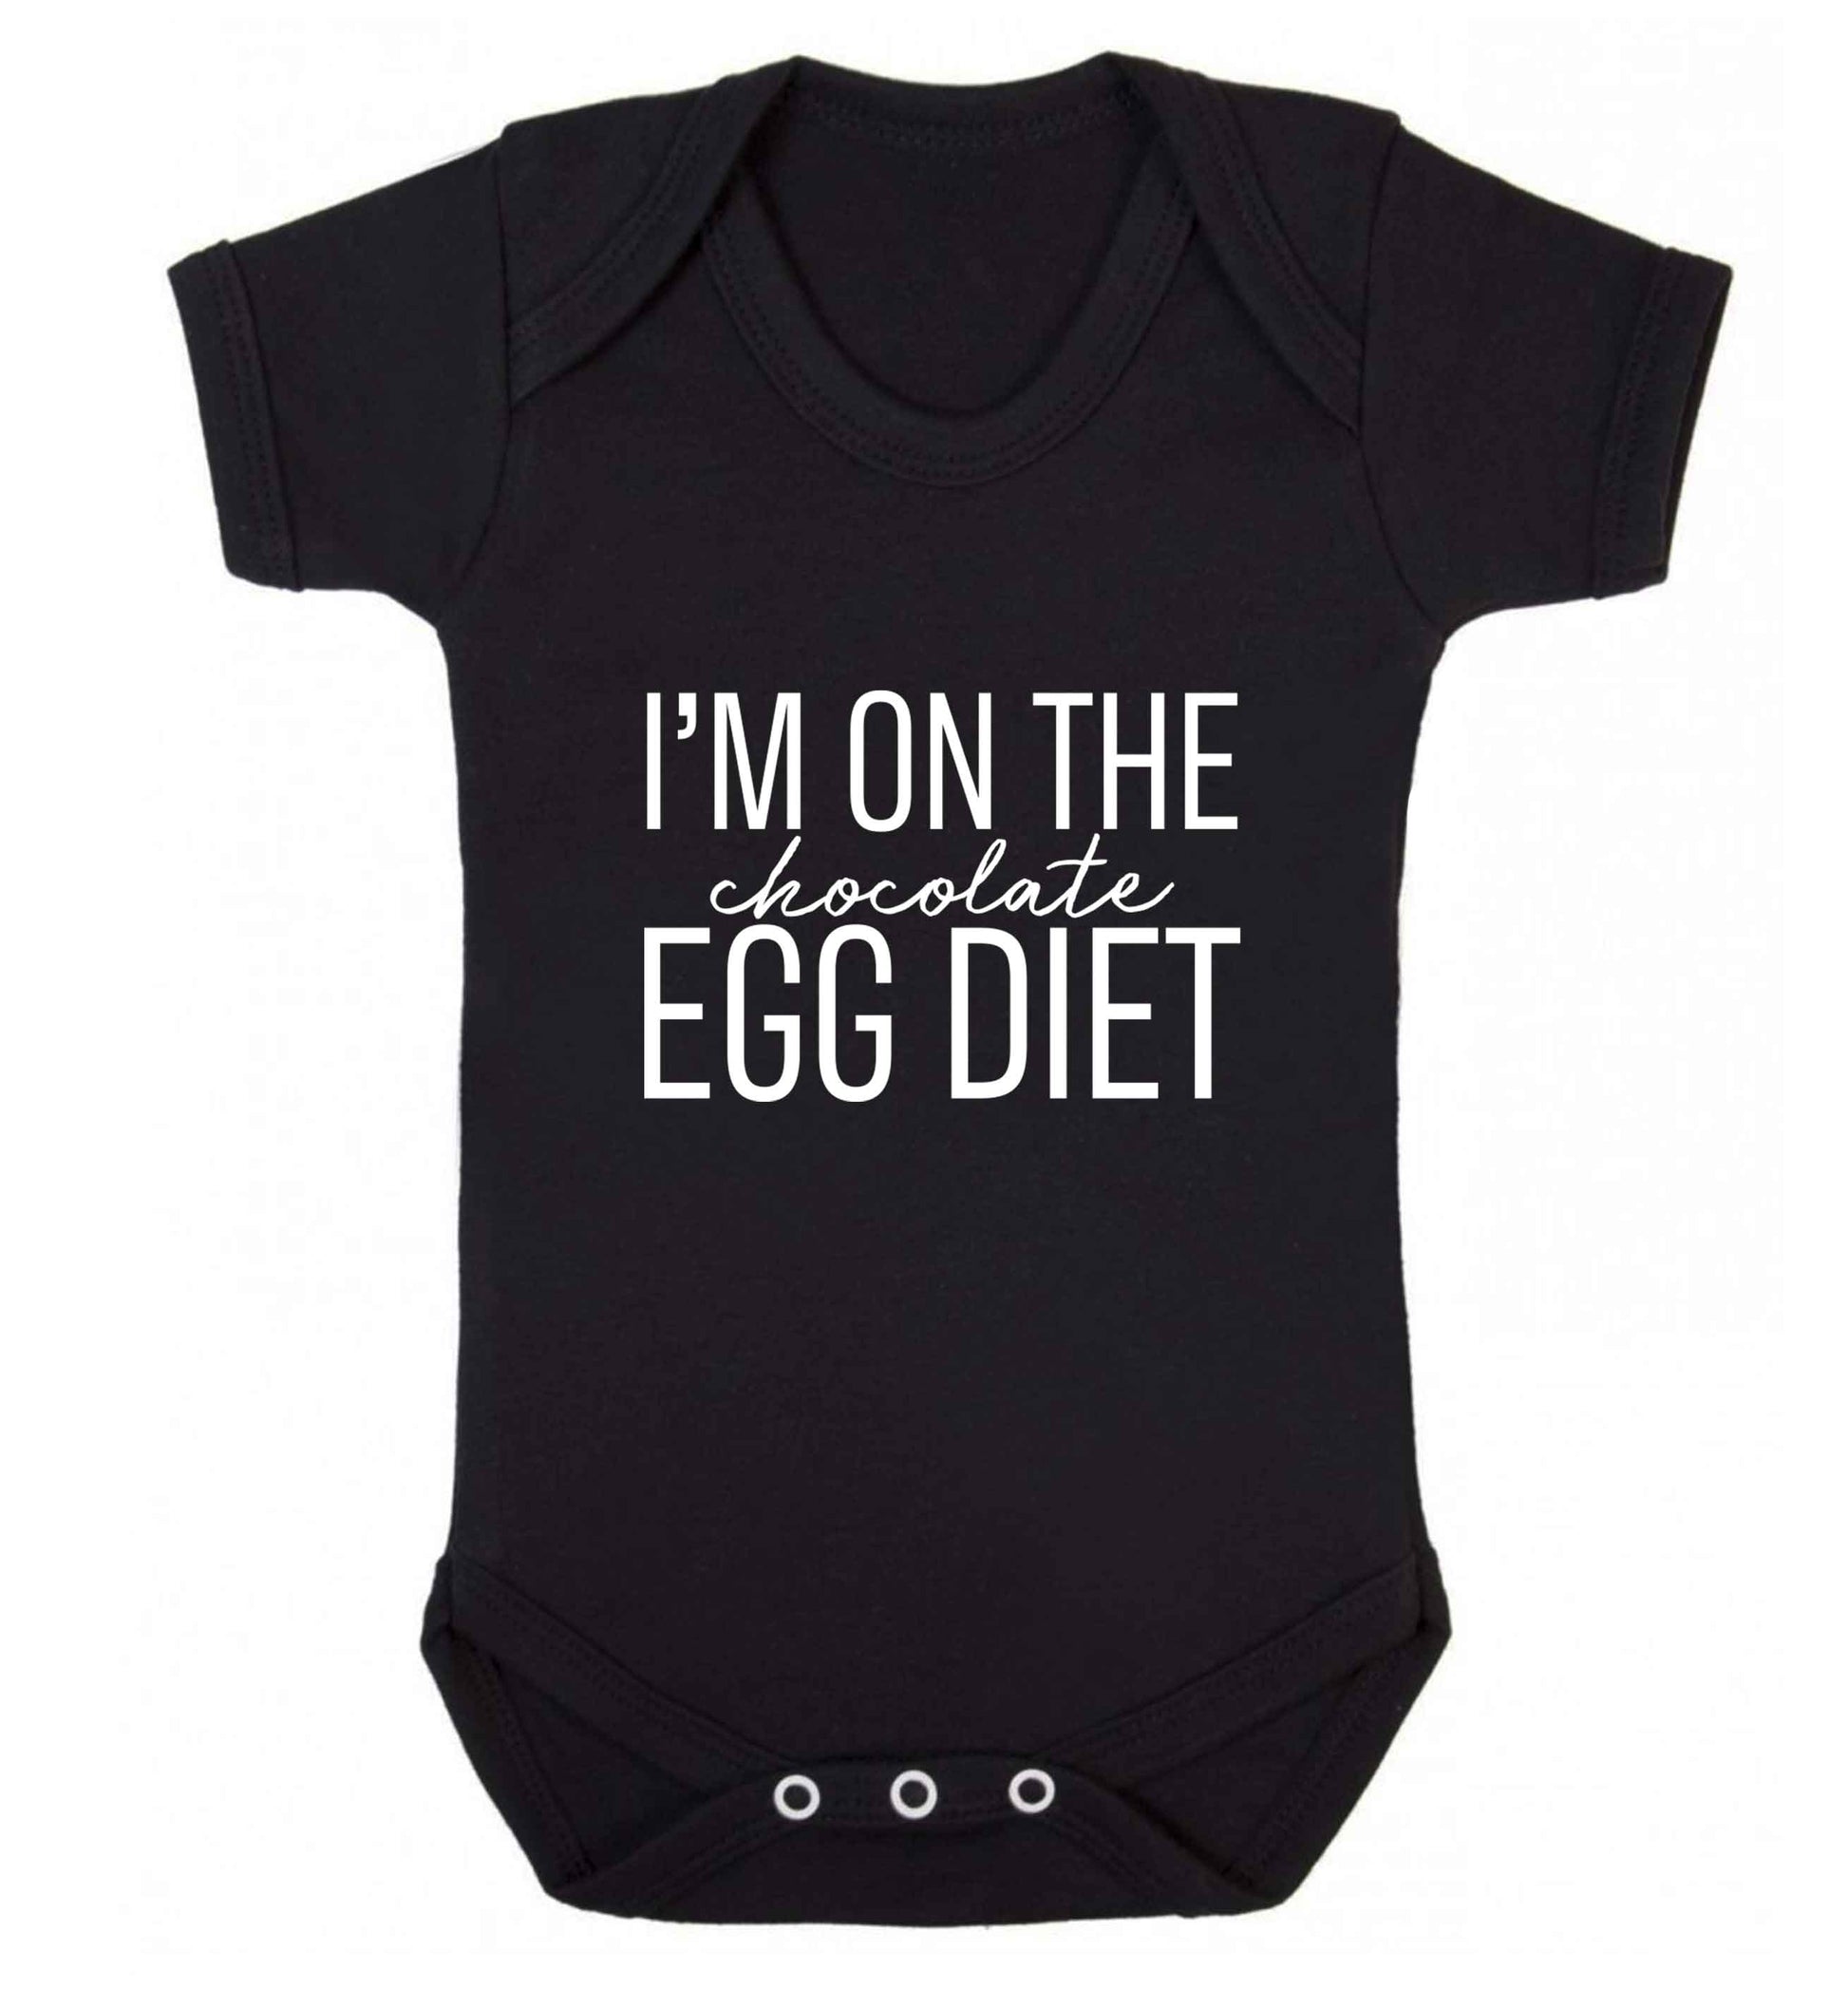 I'm on the chocolate egg diet baby vest black 18-24 months